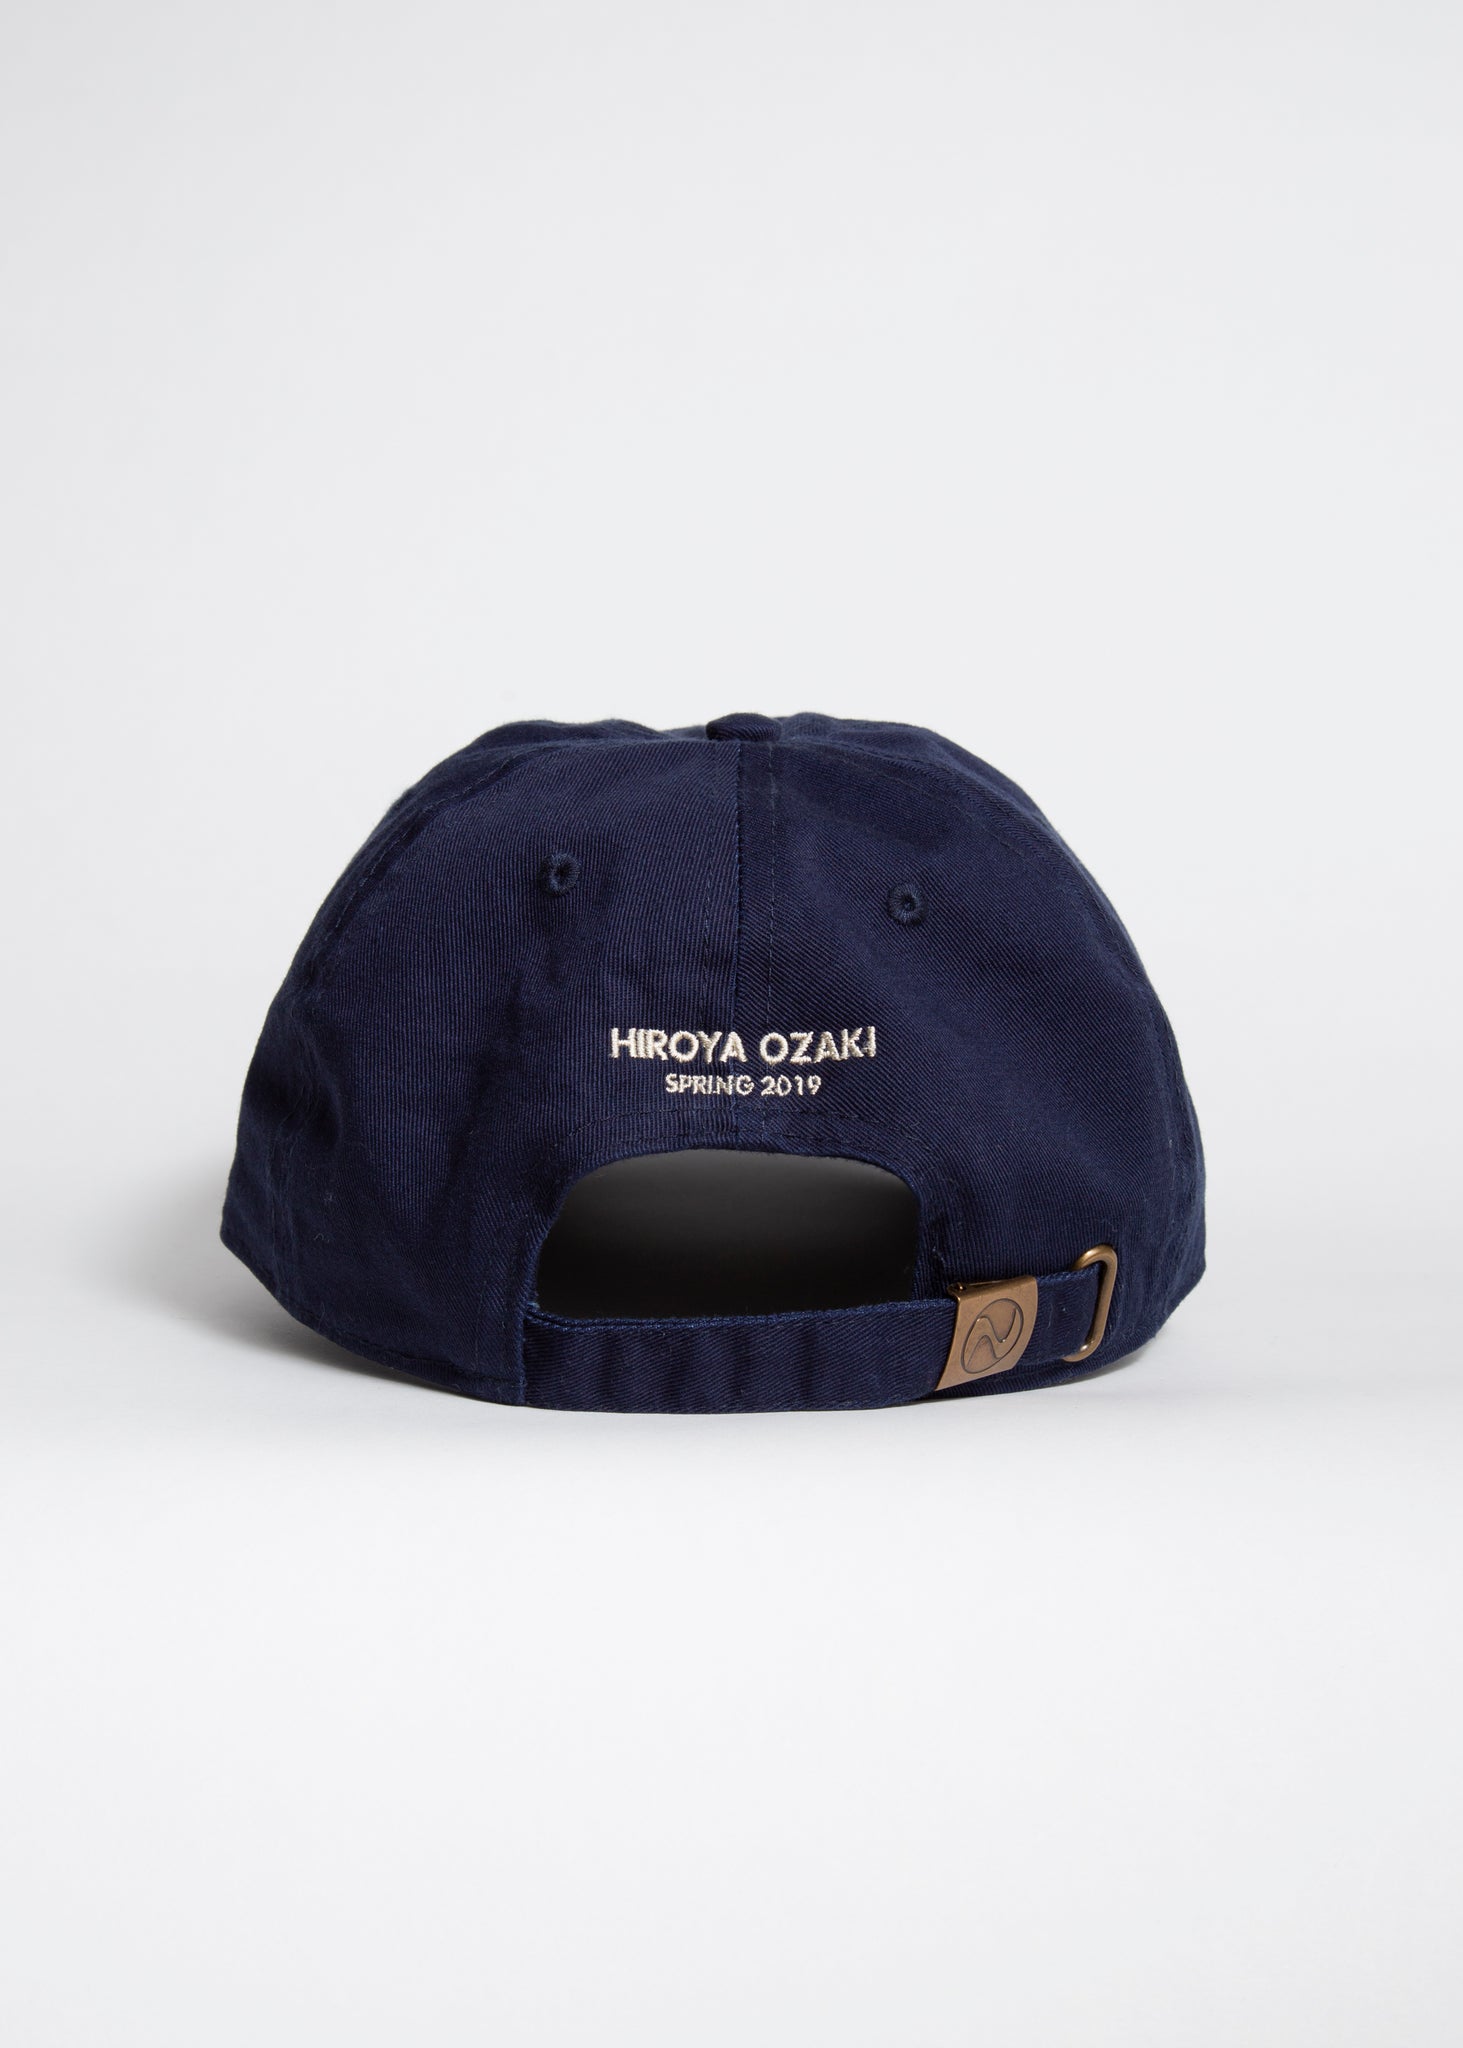 ONE MAN STAND SPRING 2019 CAP